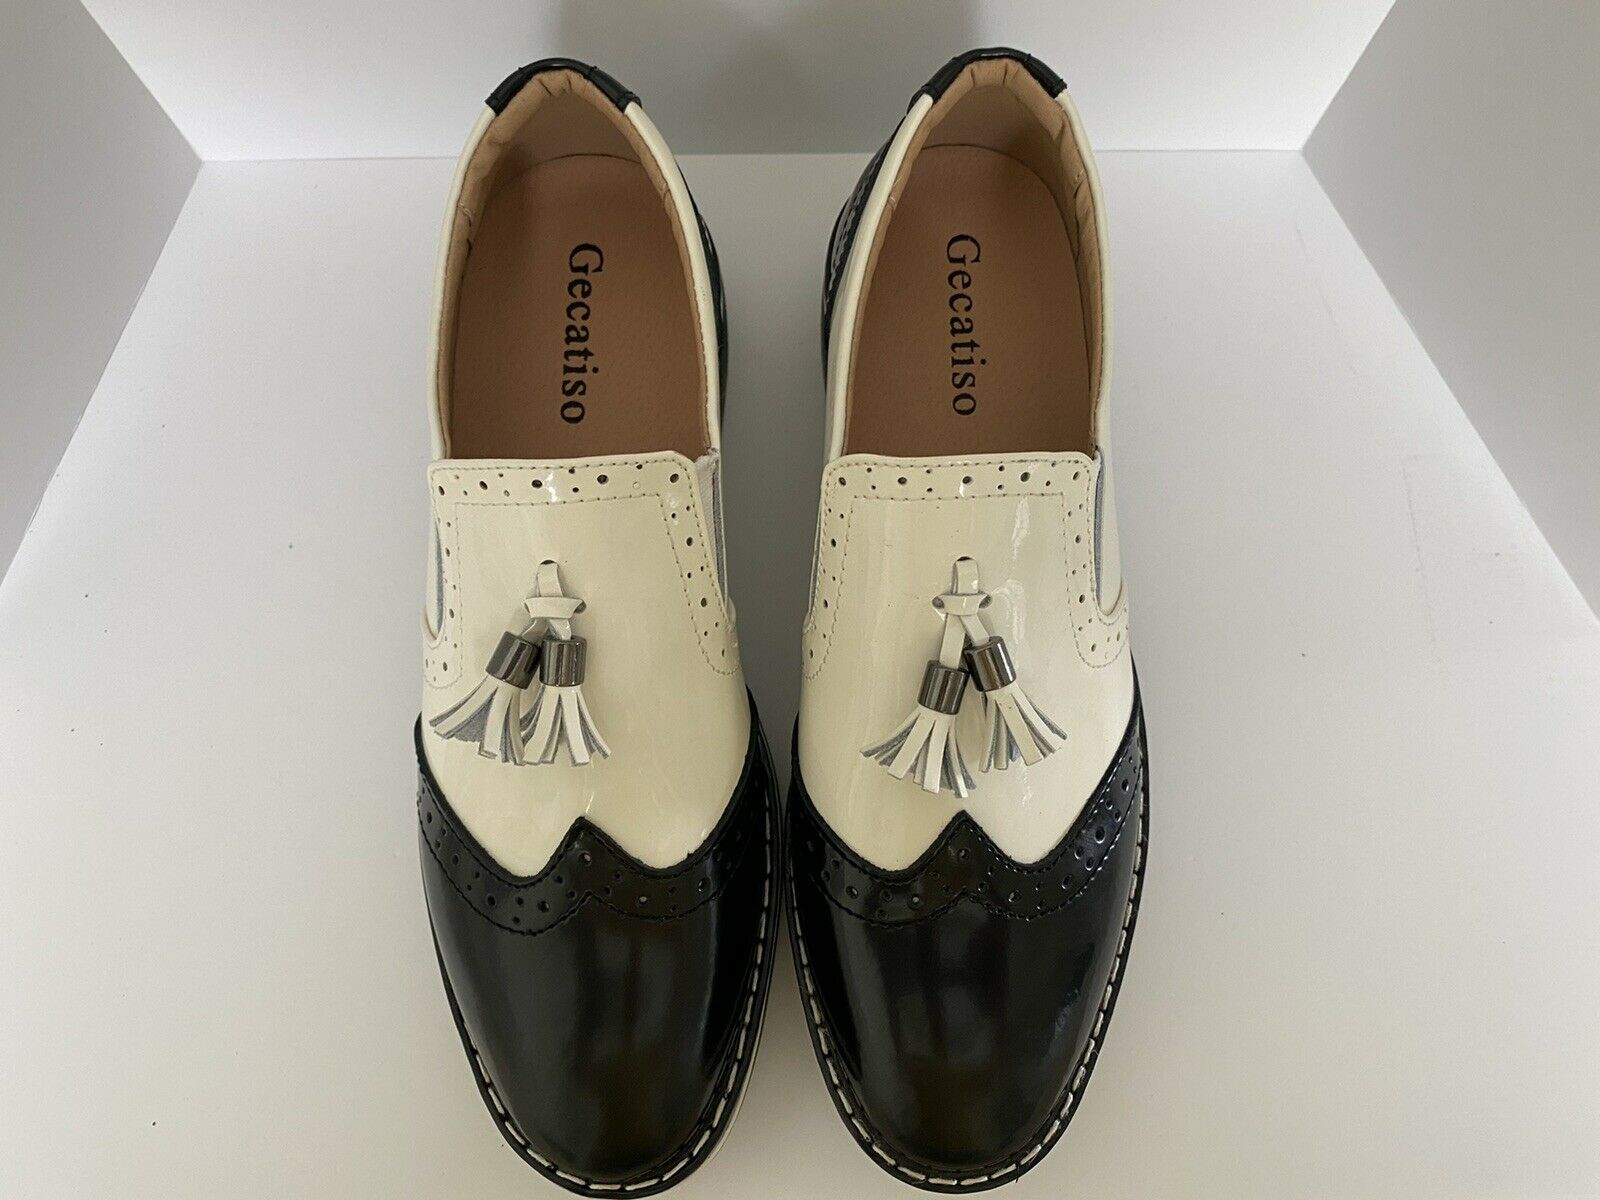 Women’s Faux Leather Wingtip Oxford Shoes IS Size 7